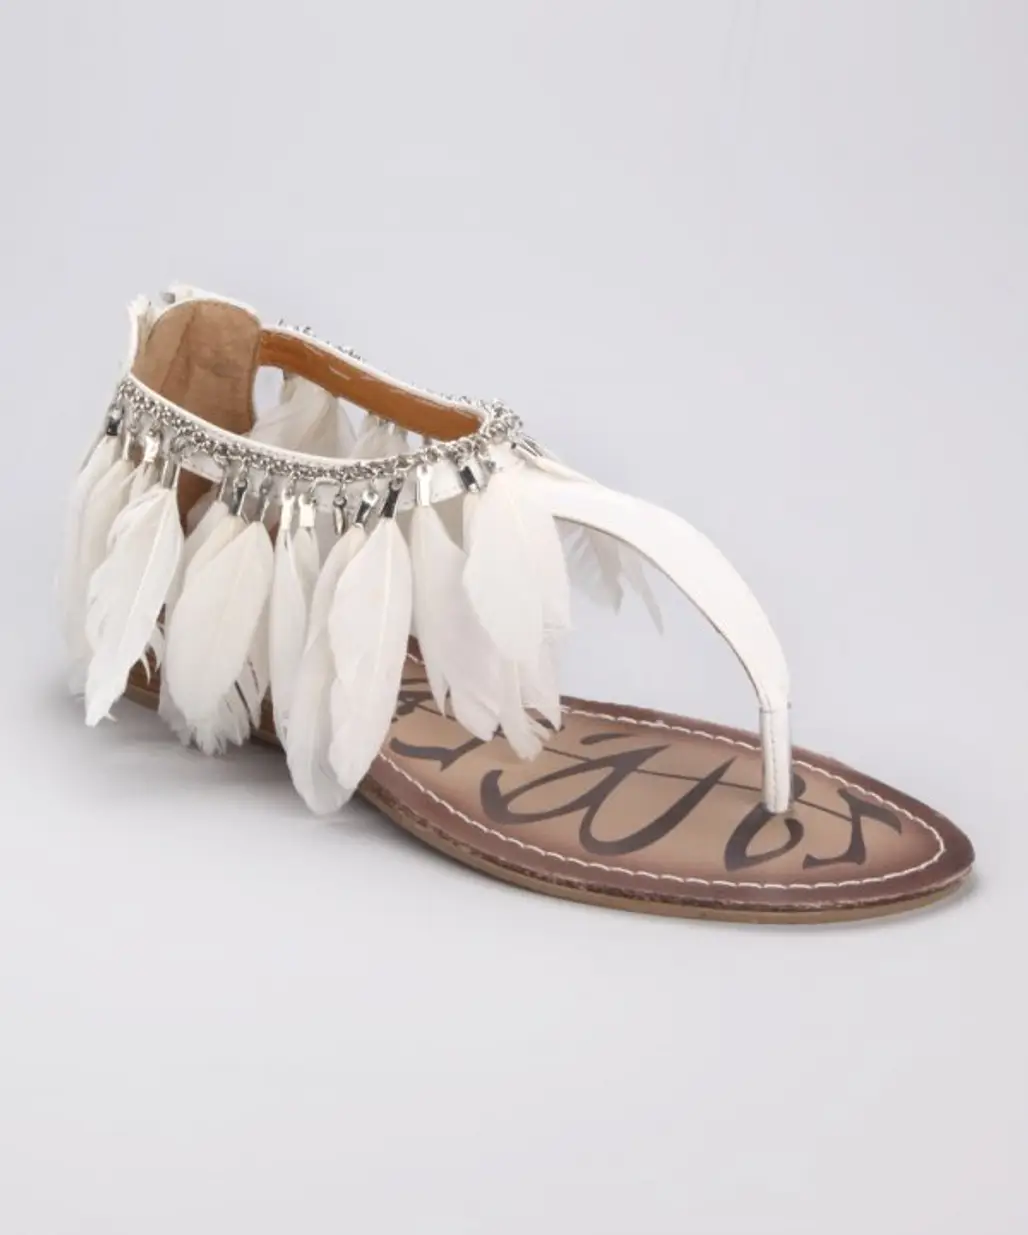 Feather-Trimmed Sandals